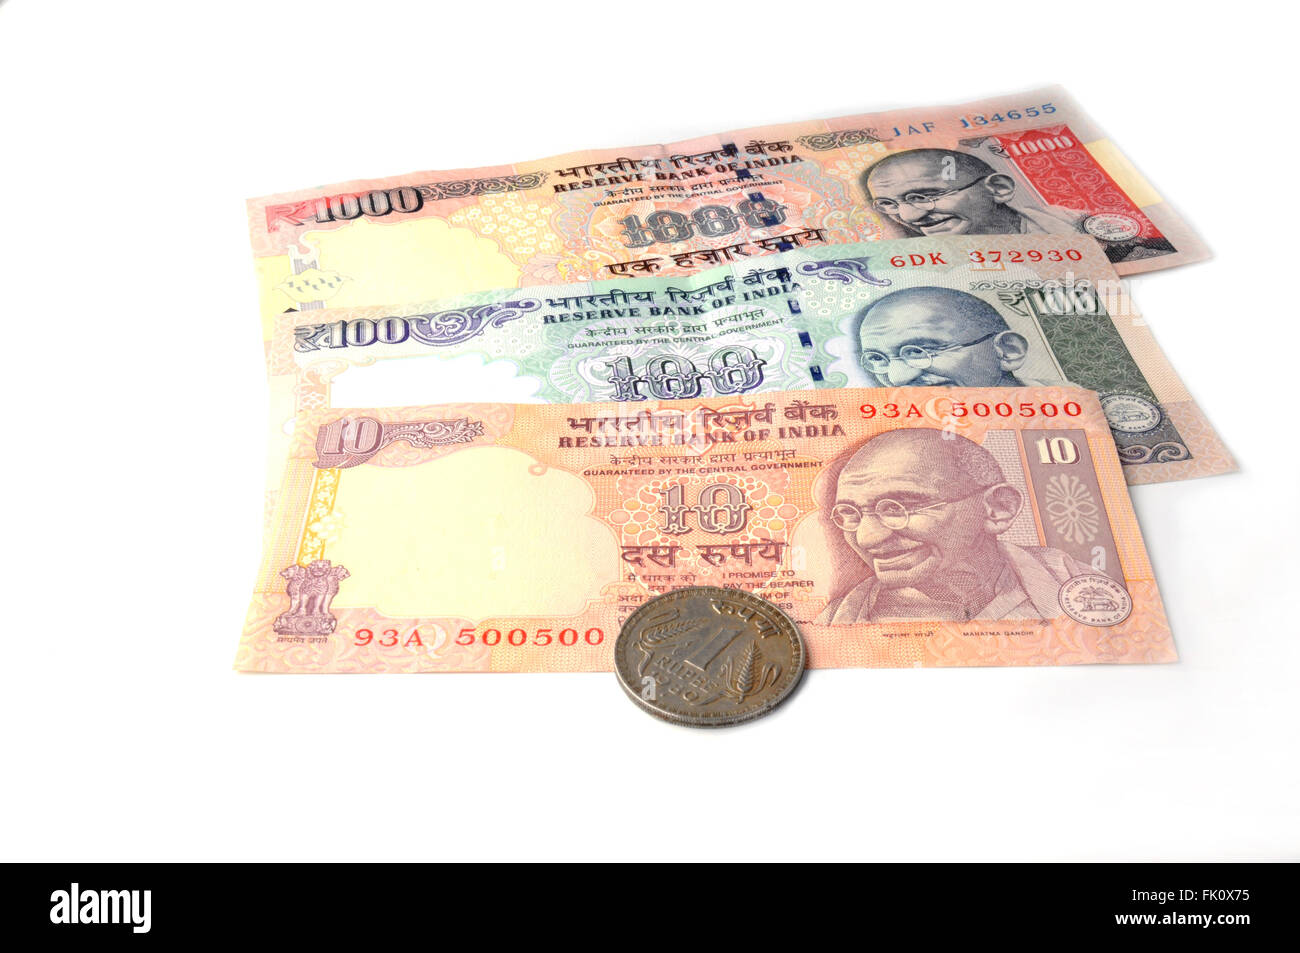 Indian currency notes and coin Stock Photo